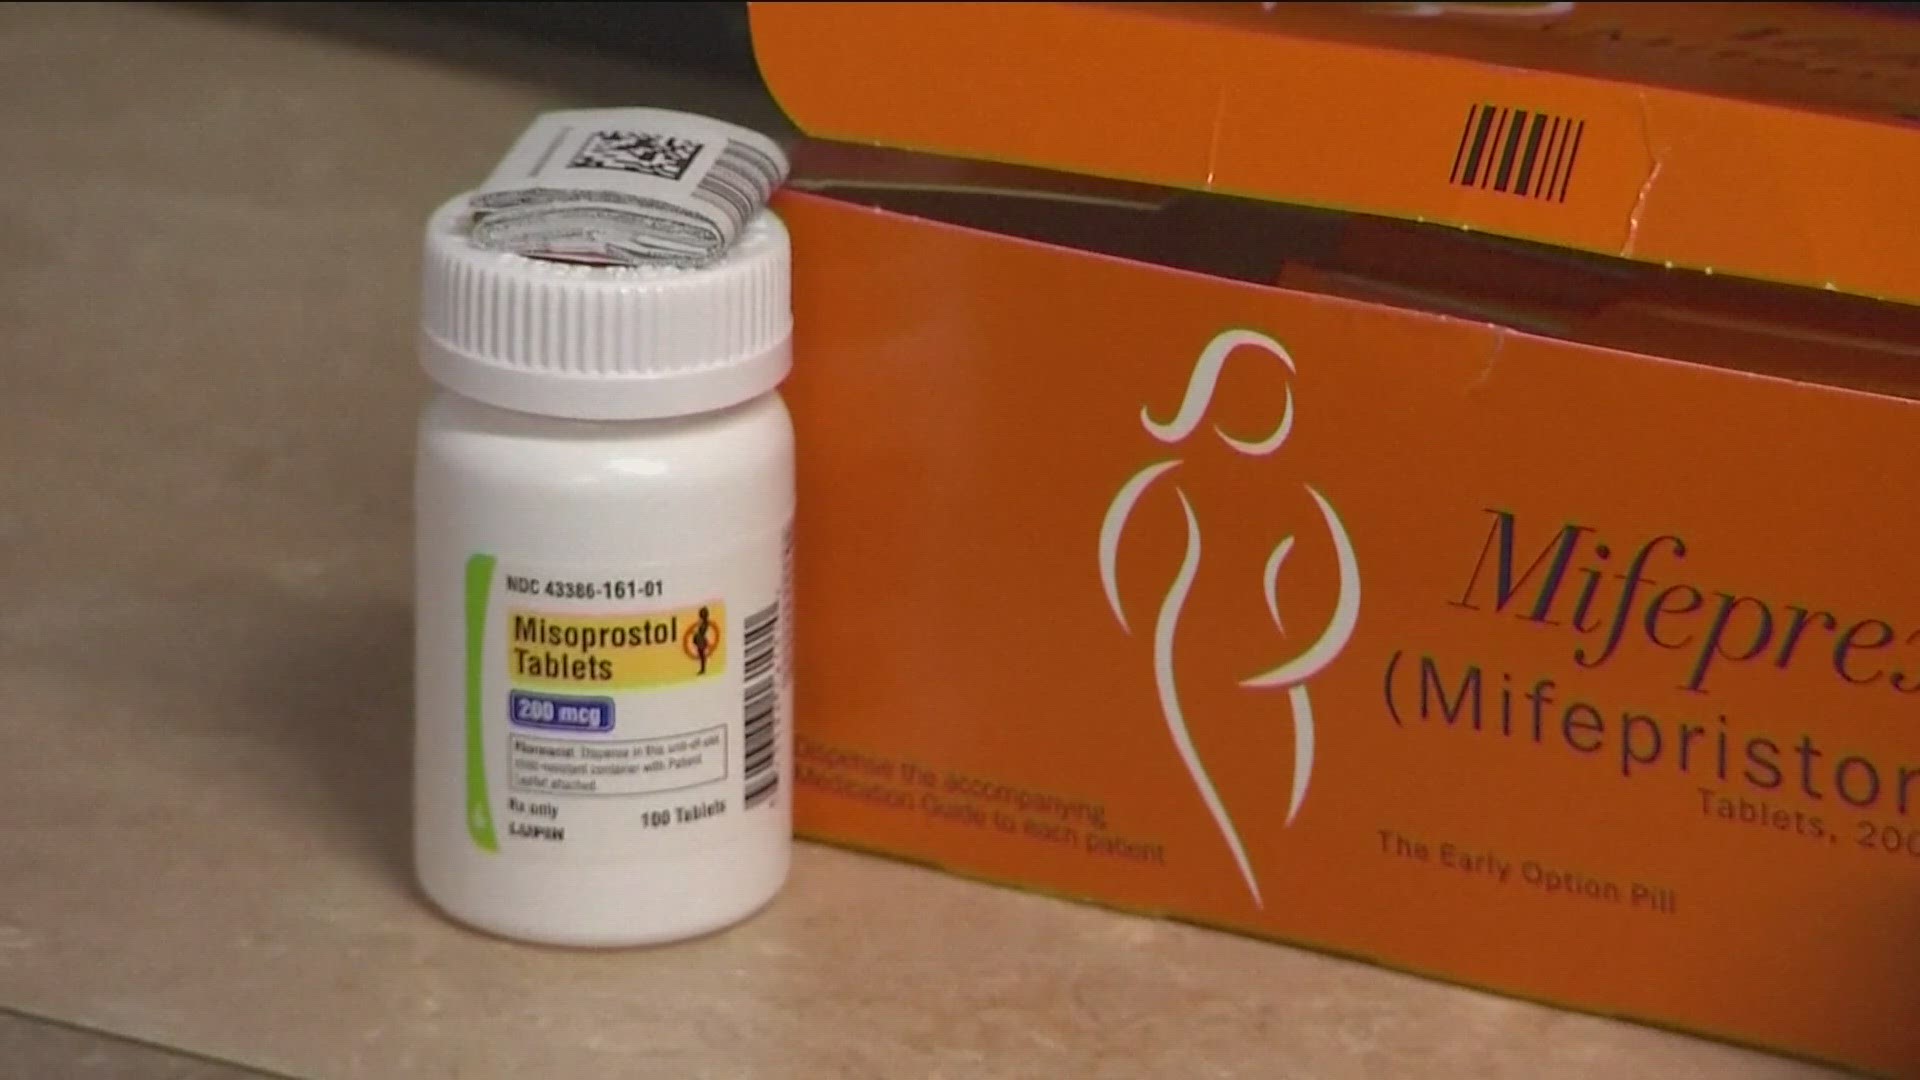 Biden administration is urging the U.S. Supreme Court to reverse abortion pill curbs. The administration asked the court to maintain broad access to the drug.